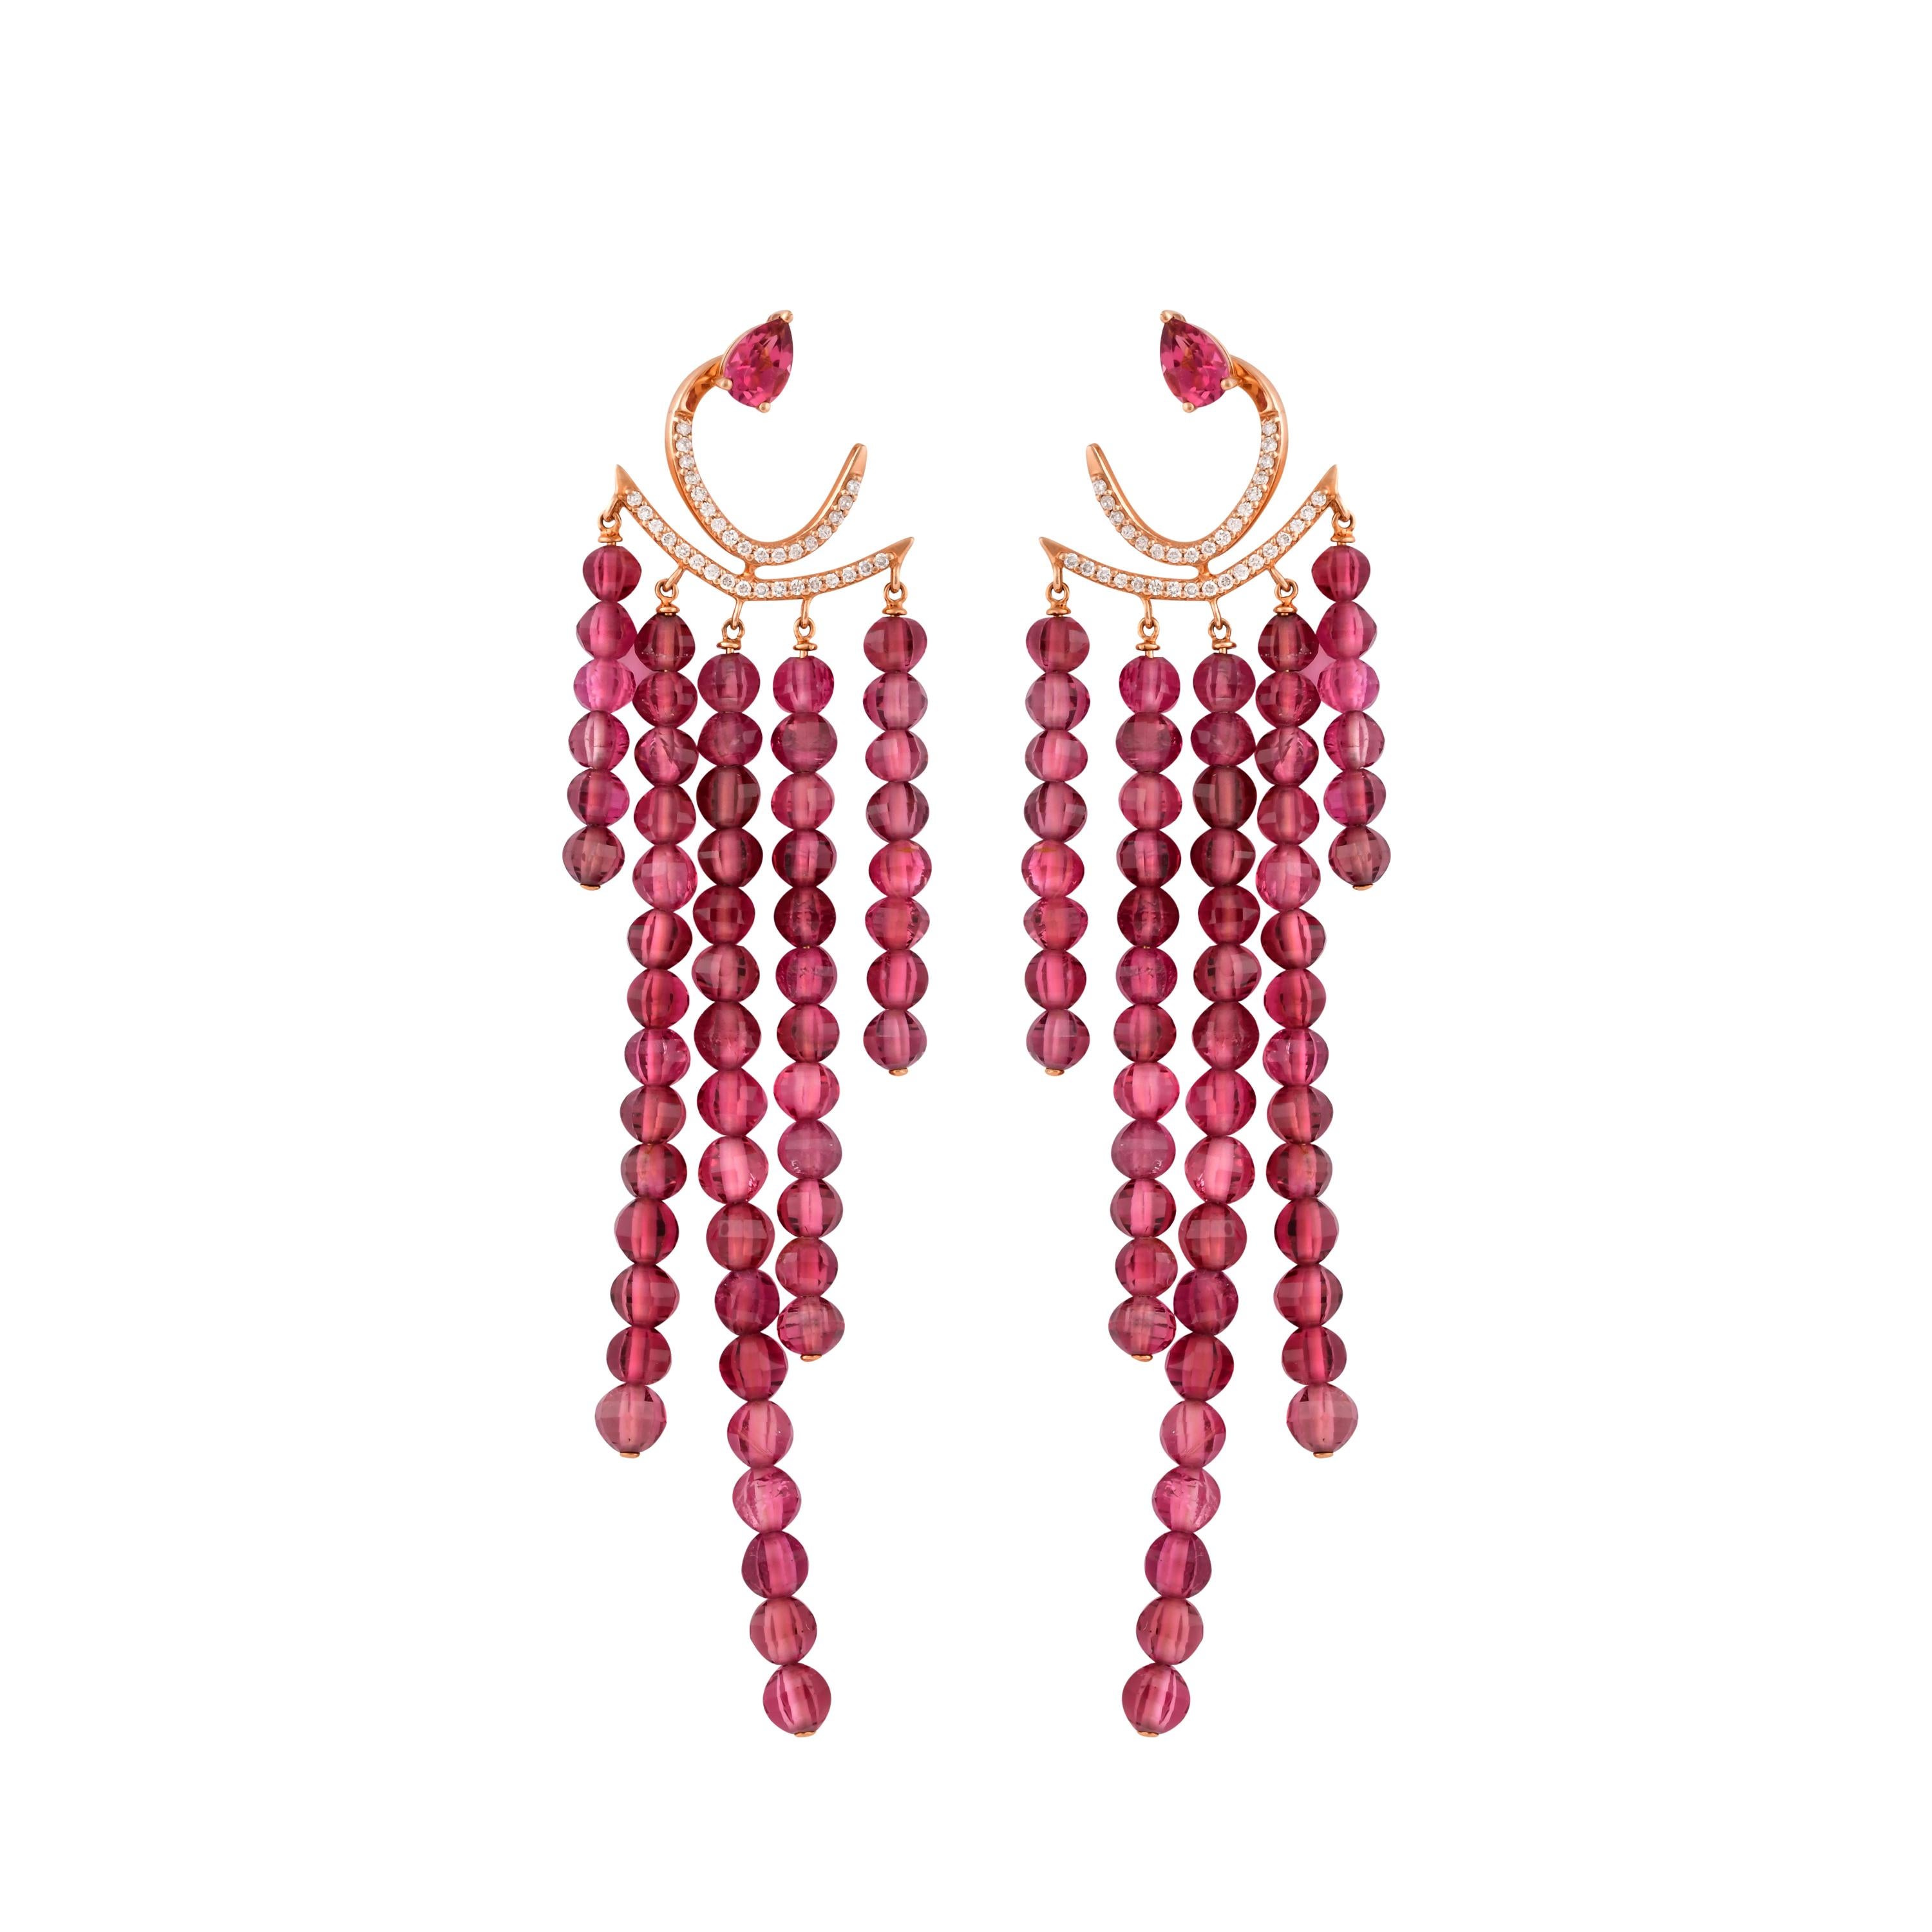 An exclusive collection of designer and unique dangle earrings by Sunita Nahata Fine Design. 

Pink Tourmaline Dangle Earring in 14 Karat Rose Gold.

Pink Tourmaline: 0.78 carat, 6X4 Size, Pear Shape.
Pink Tourmaline: 55.83 carat, 4.00 Size, Balls